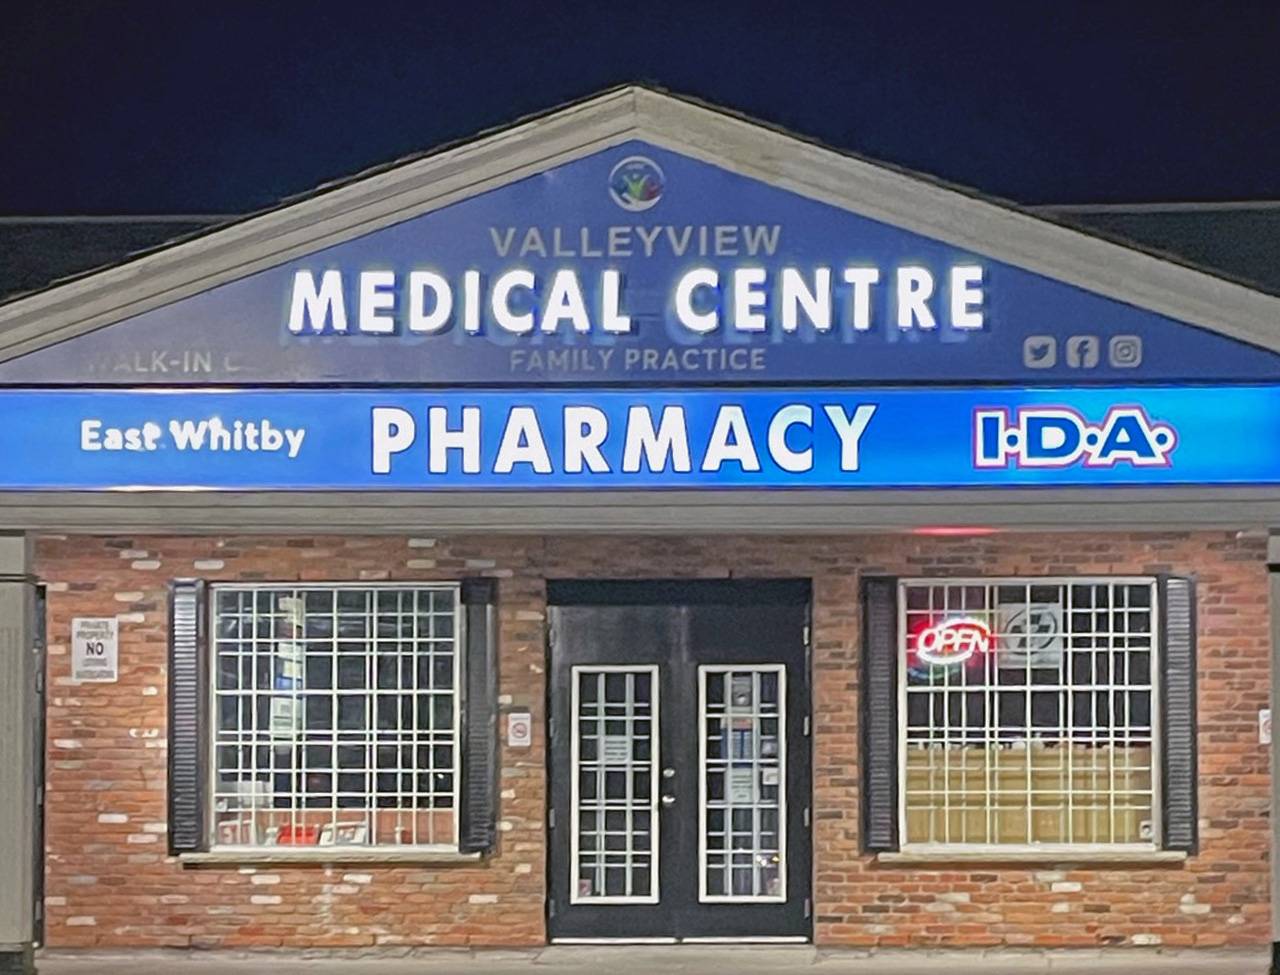 Valleyview Medical Centre is a medical clinic in Whitby.